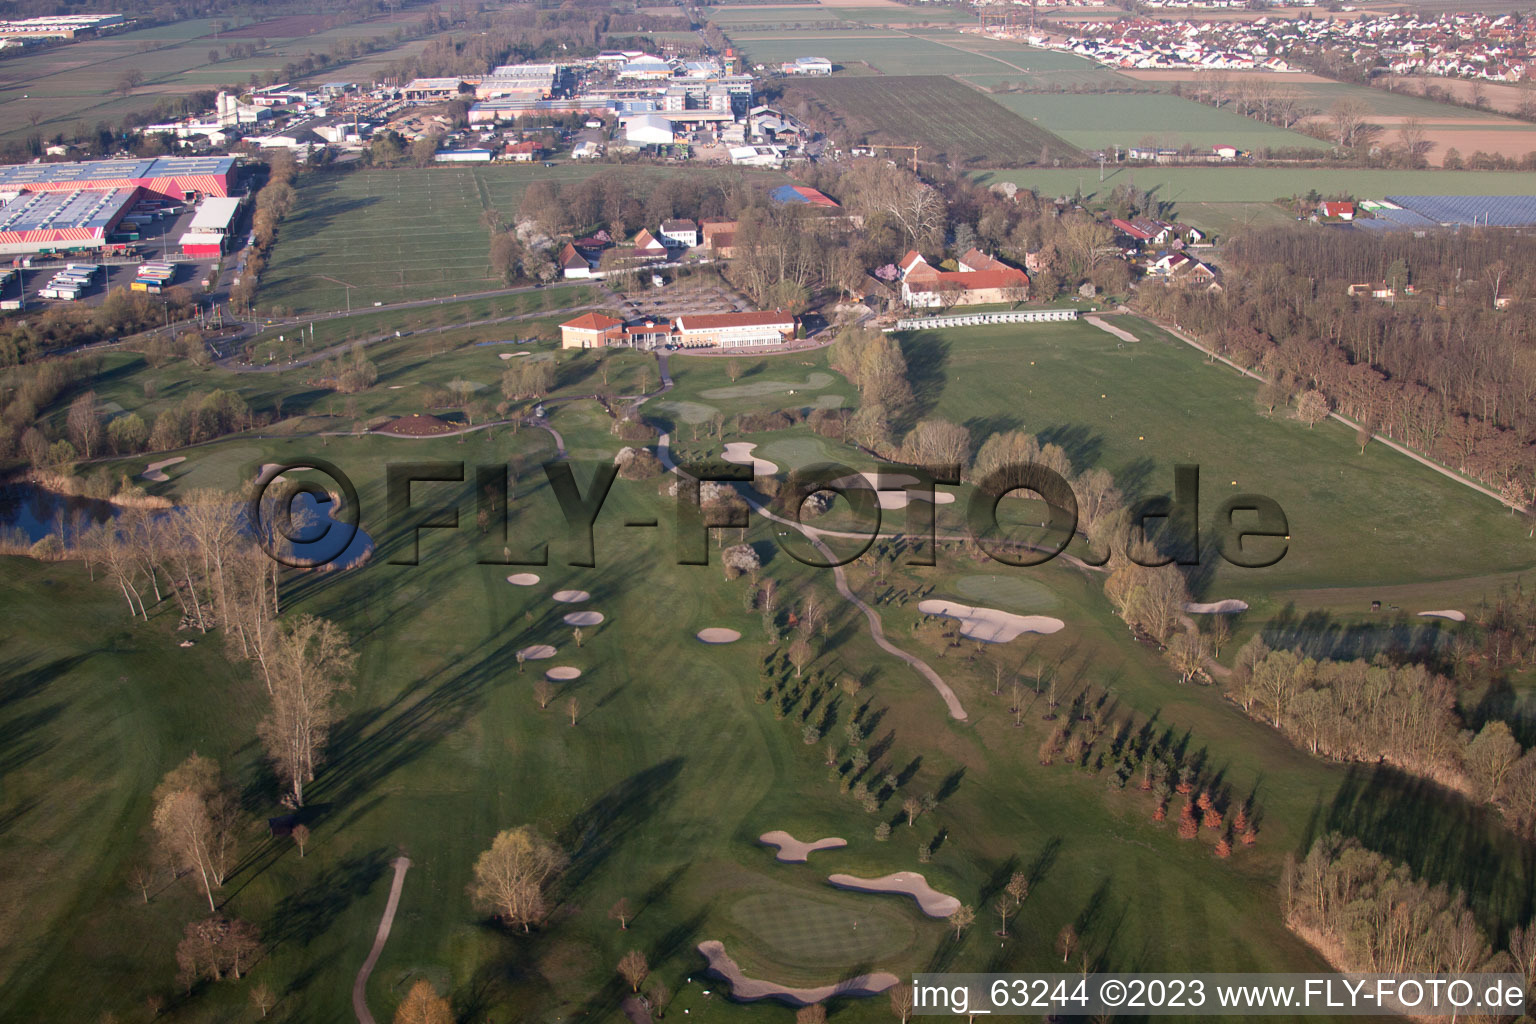 Drone recording of Dreihof Golf Club in Essingen in the state Rhineland-Palatinate, Germany